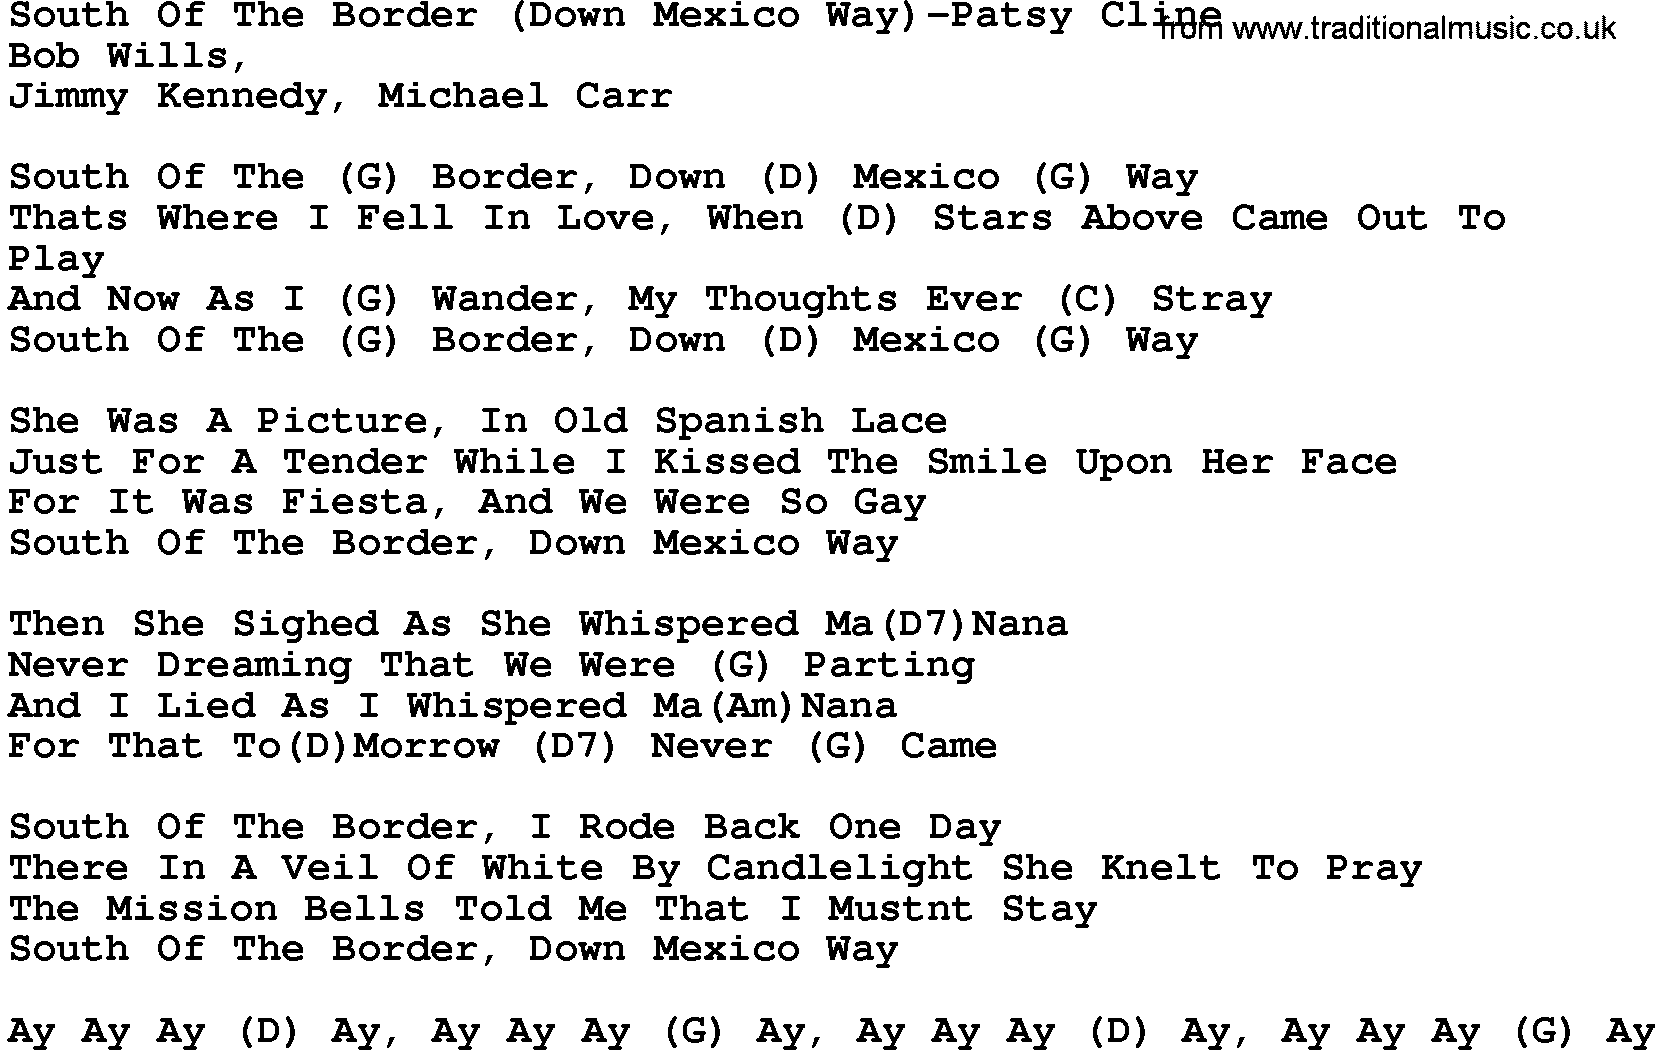 Country music song: South Of The Border(Down Mexico Way)-Patsy Cline lyrics and chords